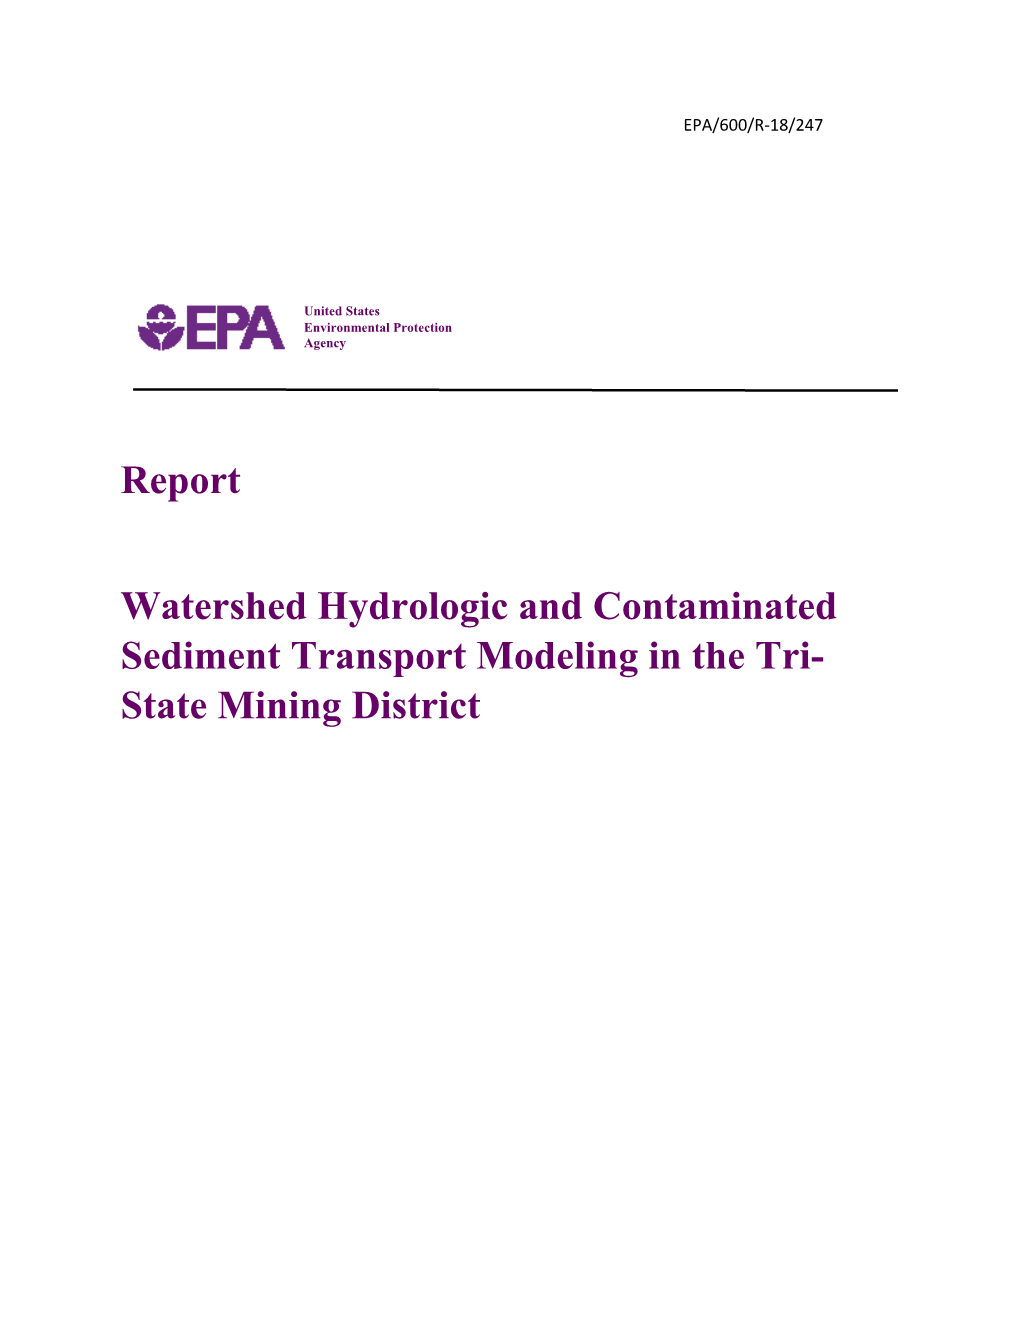 Watershed Hydrologic and Contaminated Sediment Transport Modeling in the Tri- State Mining District EPA/600/R-18/247